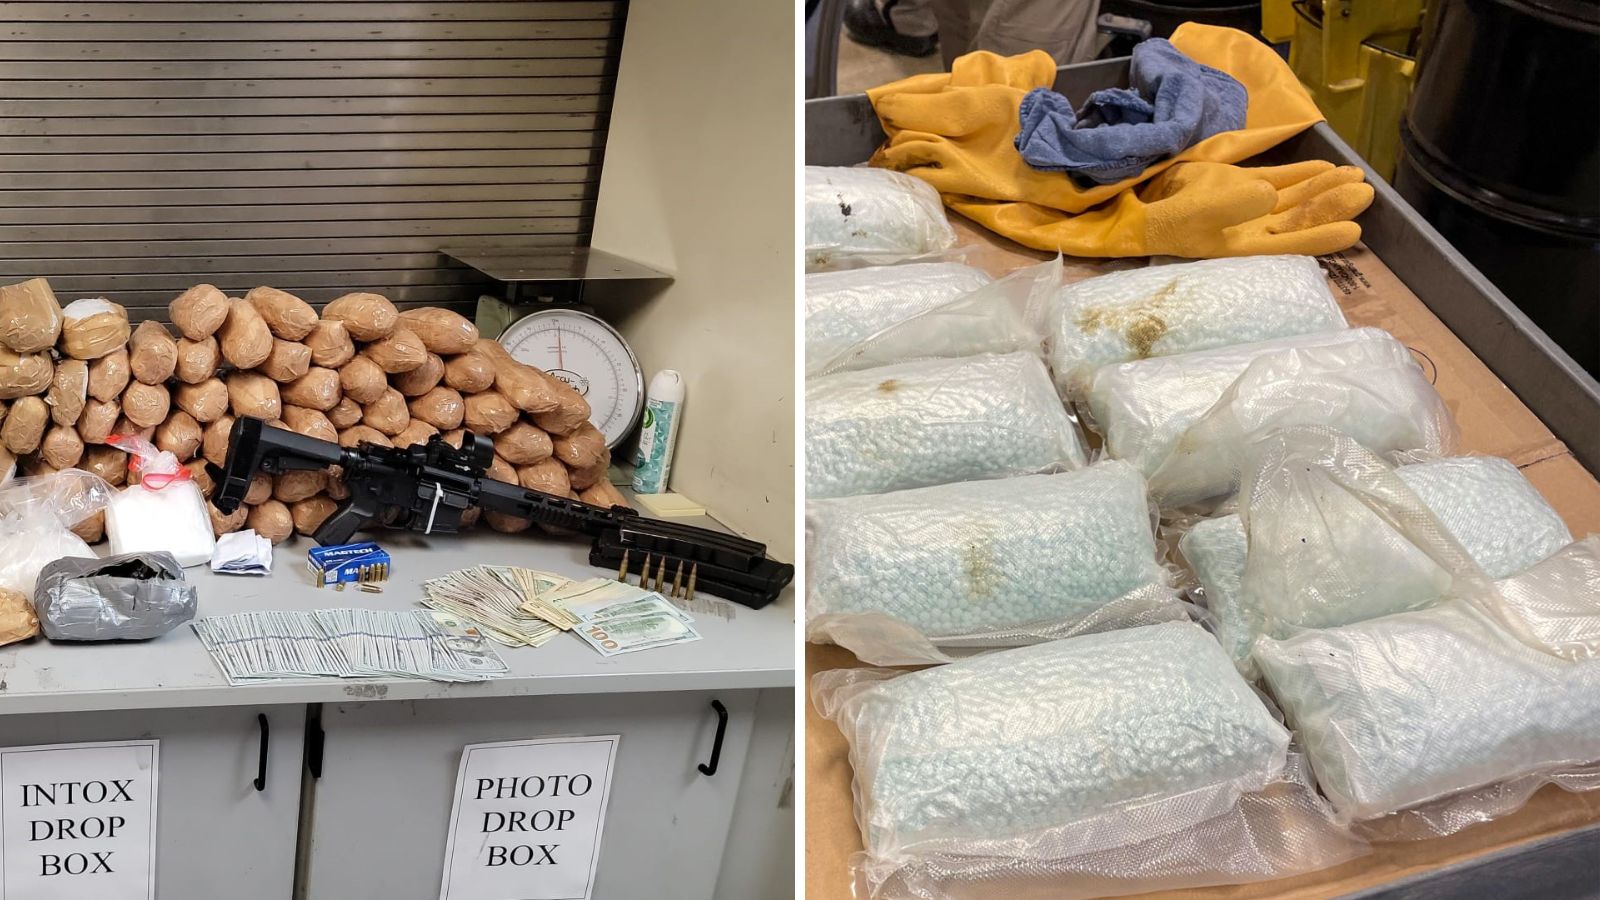 Arizona troopers seize 1,500 pounds of fentanyl over 6-month period